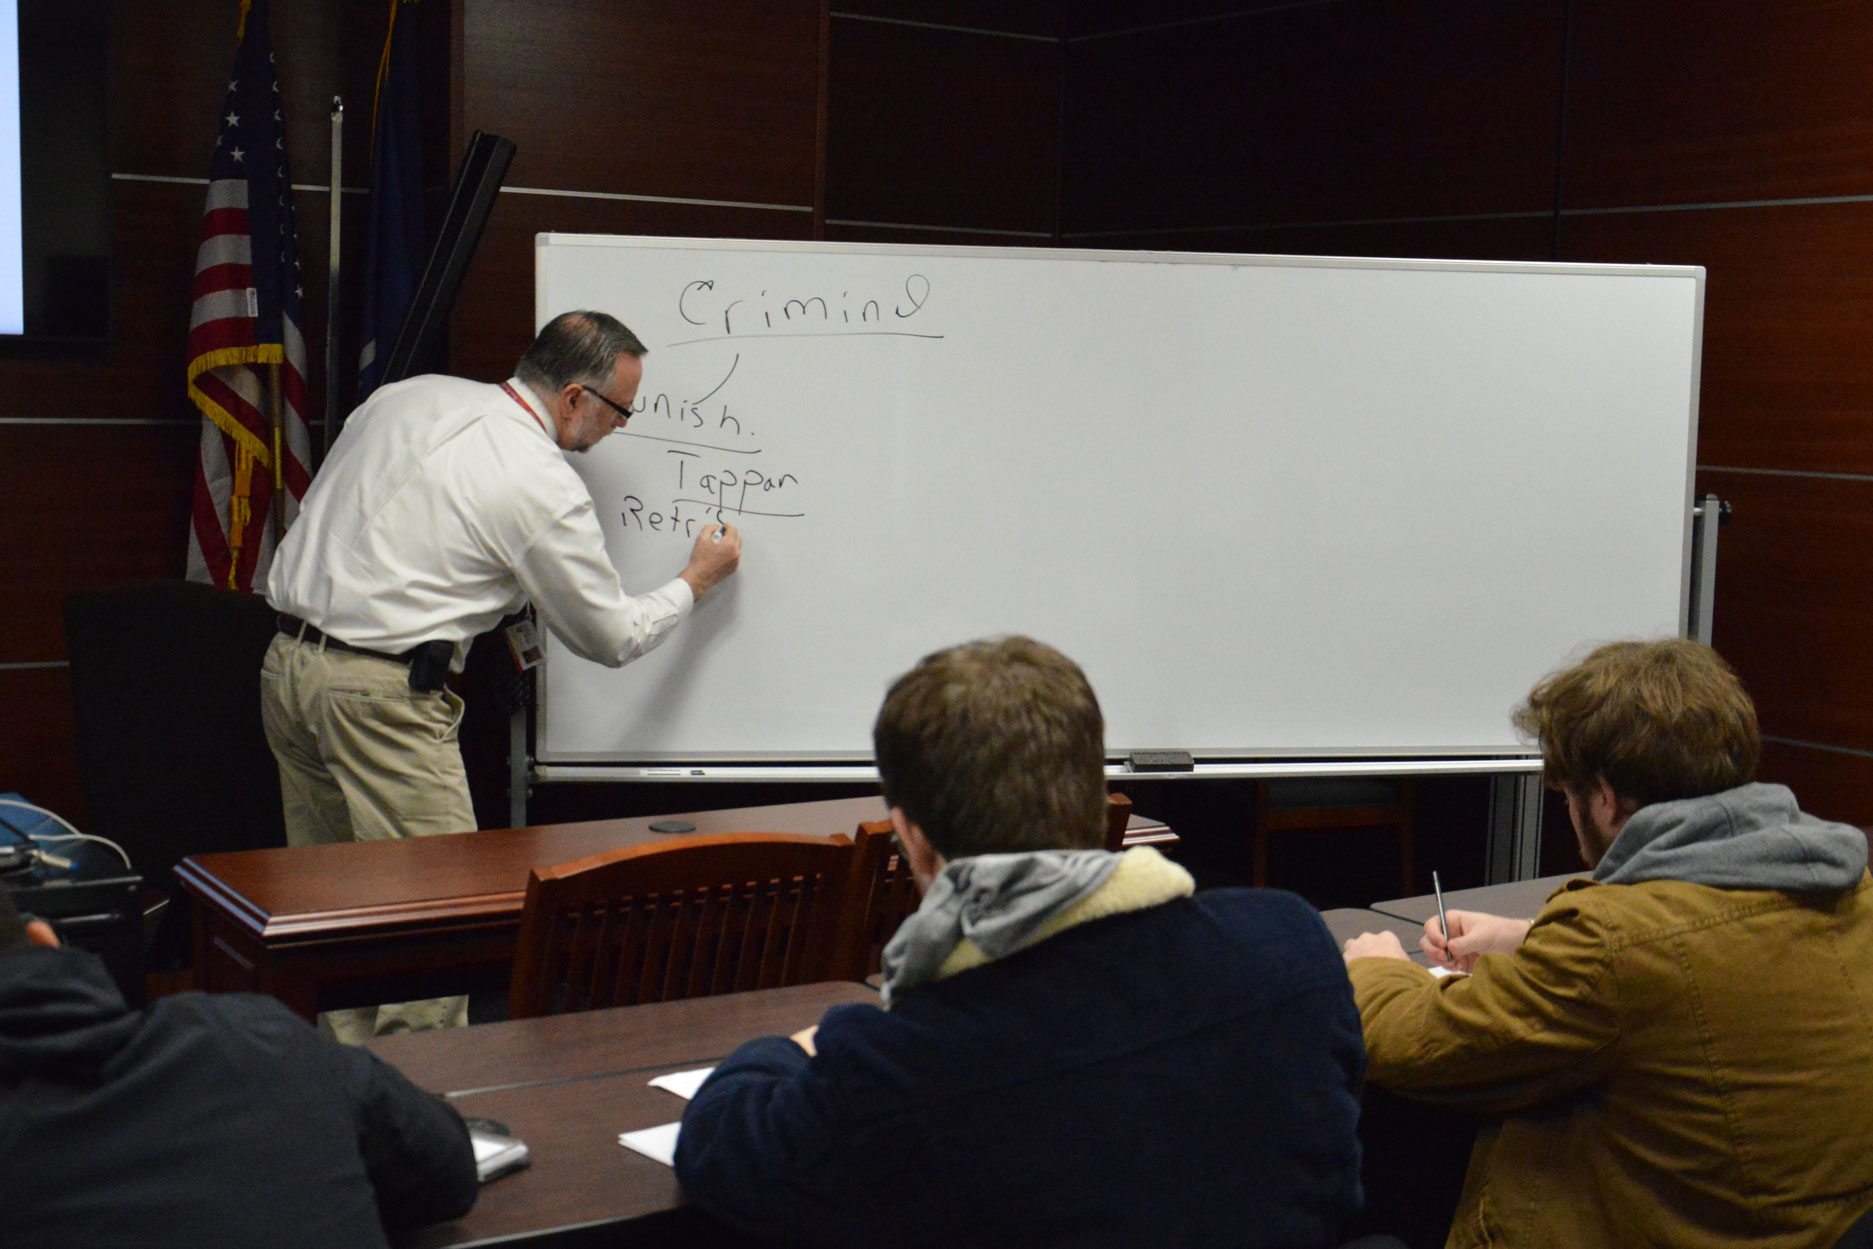 Professor writes on whiteboard for students in Molloy University's Criminal Justice department